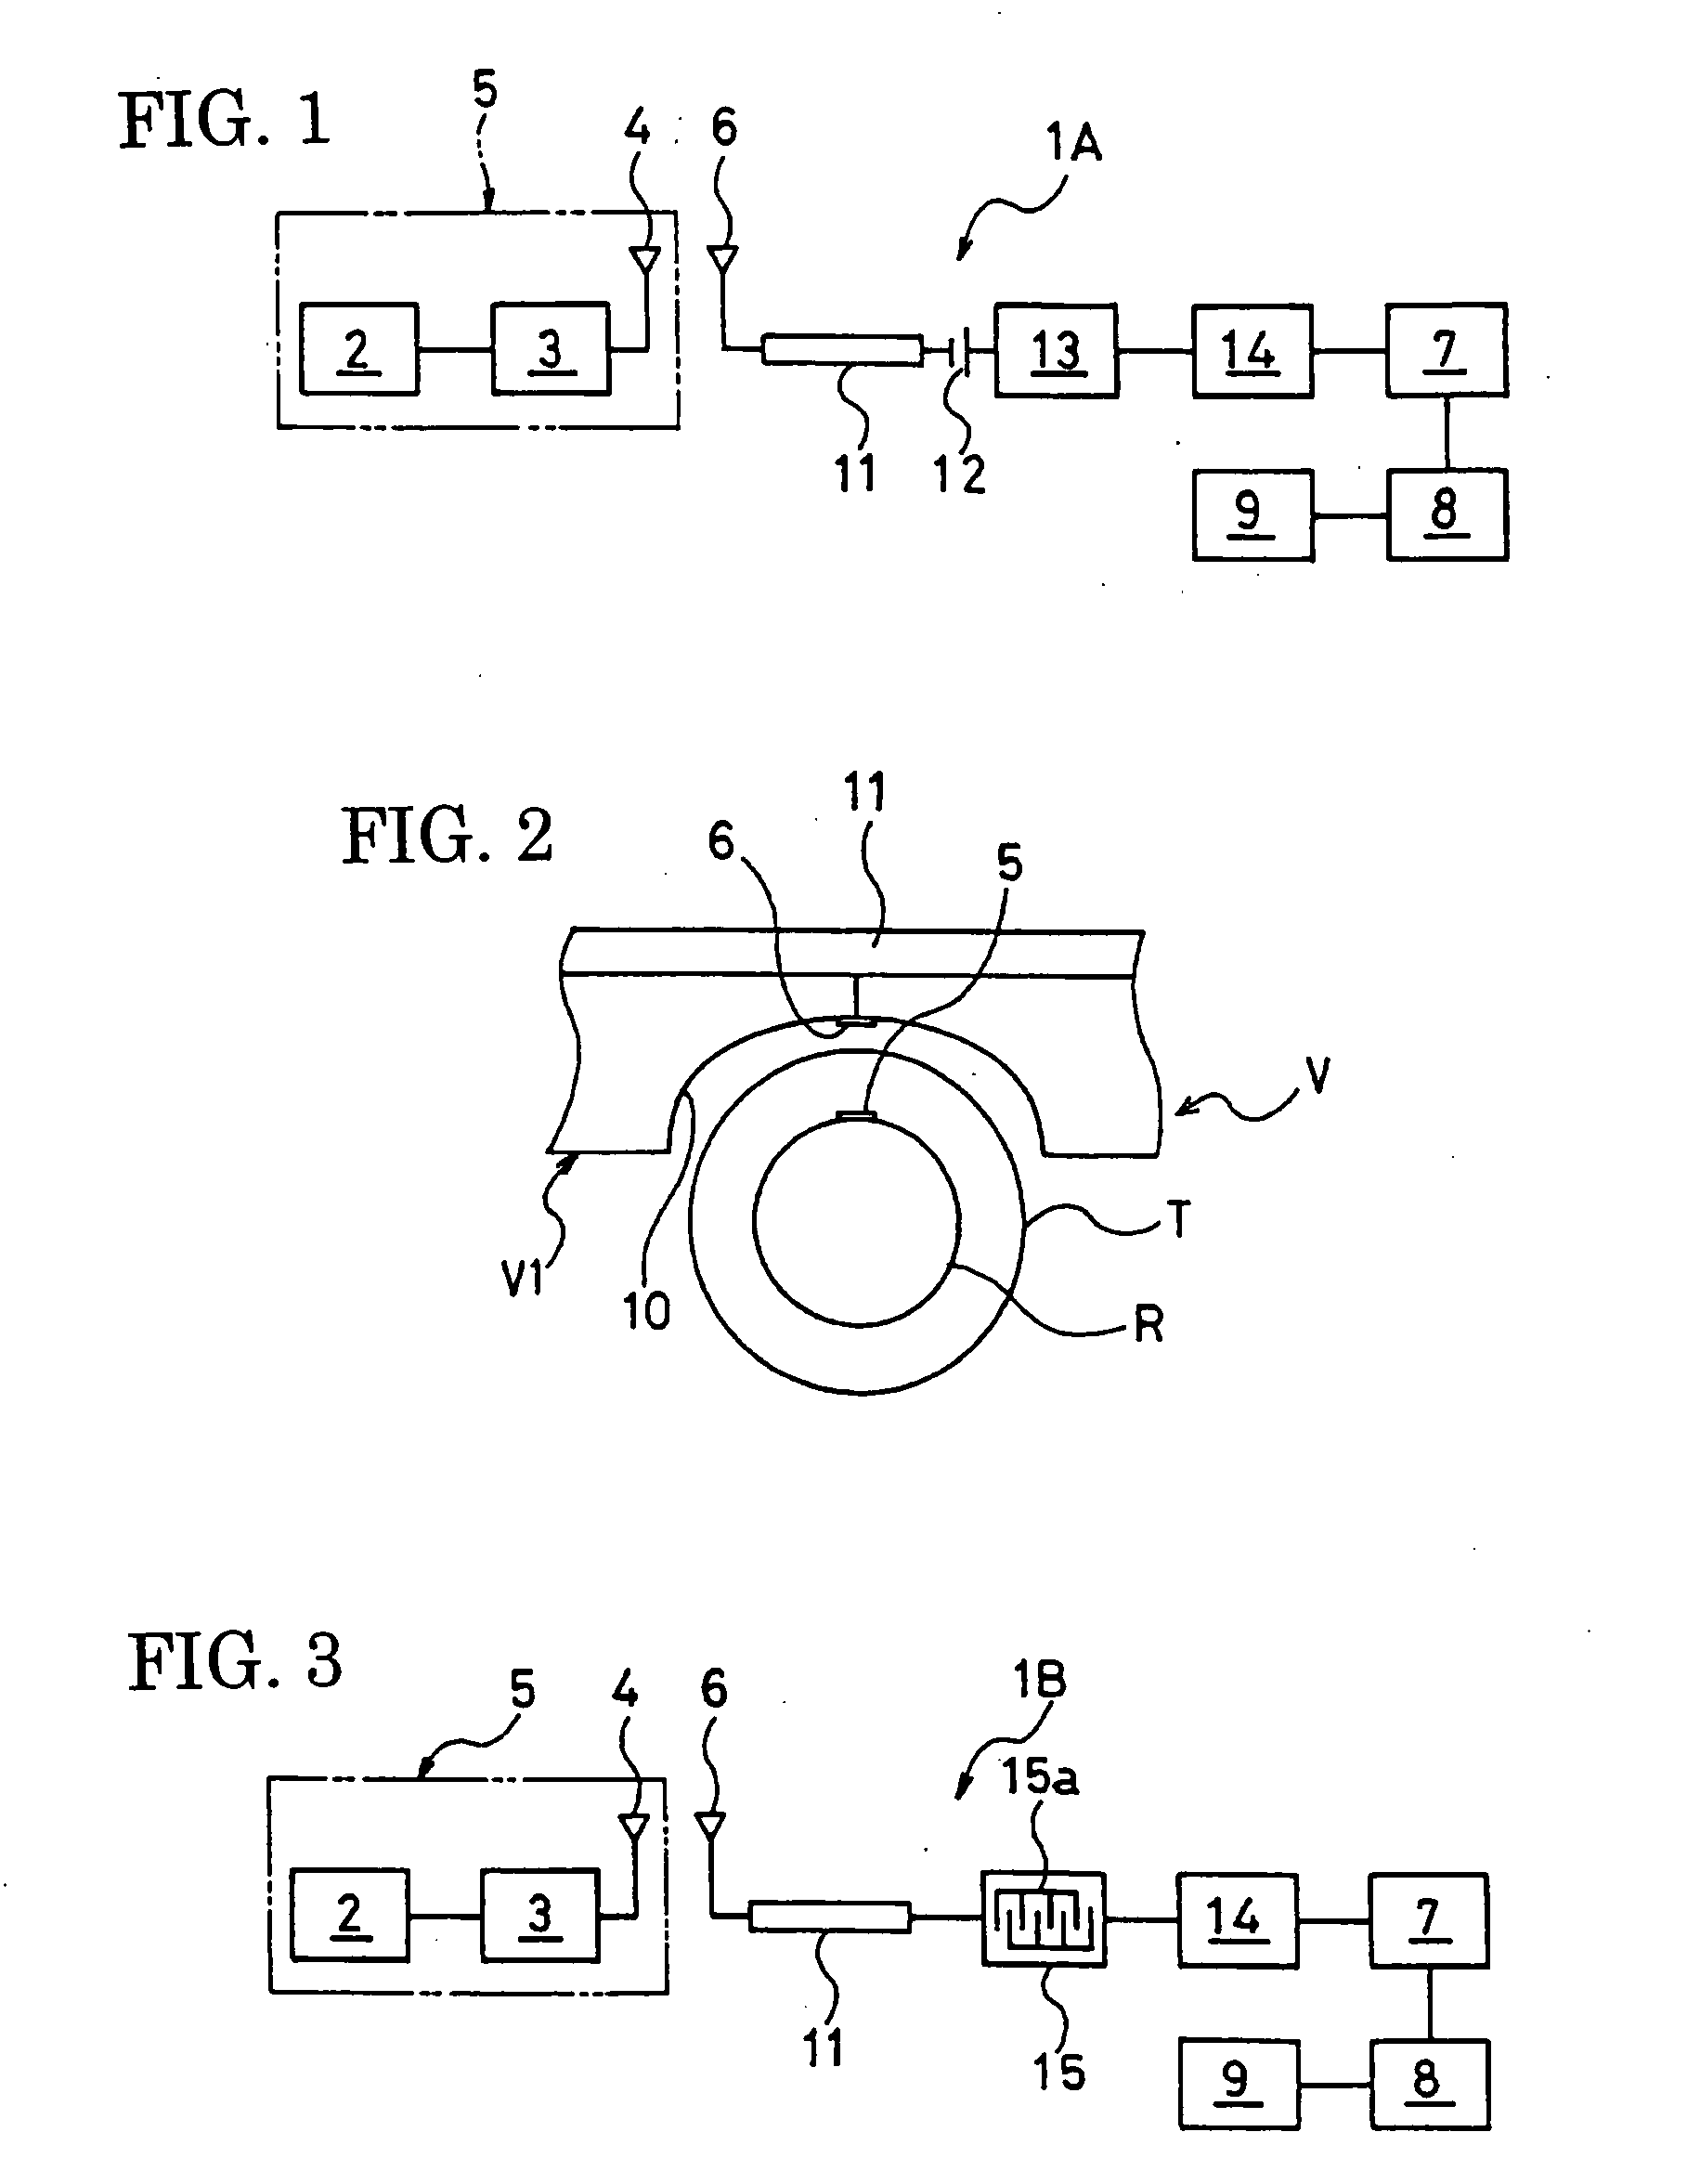 Tire Condition Detection Device